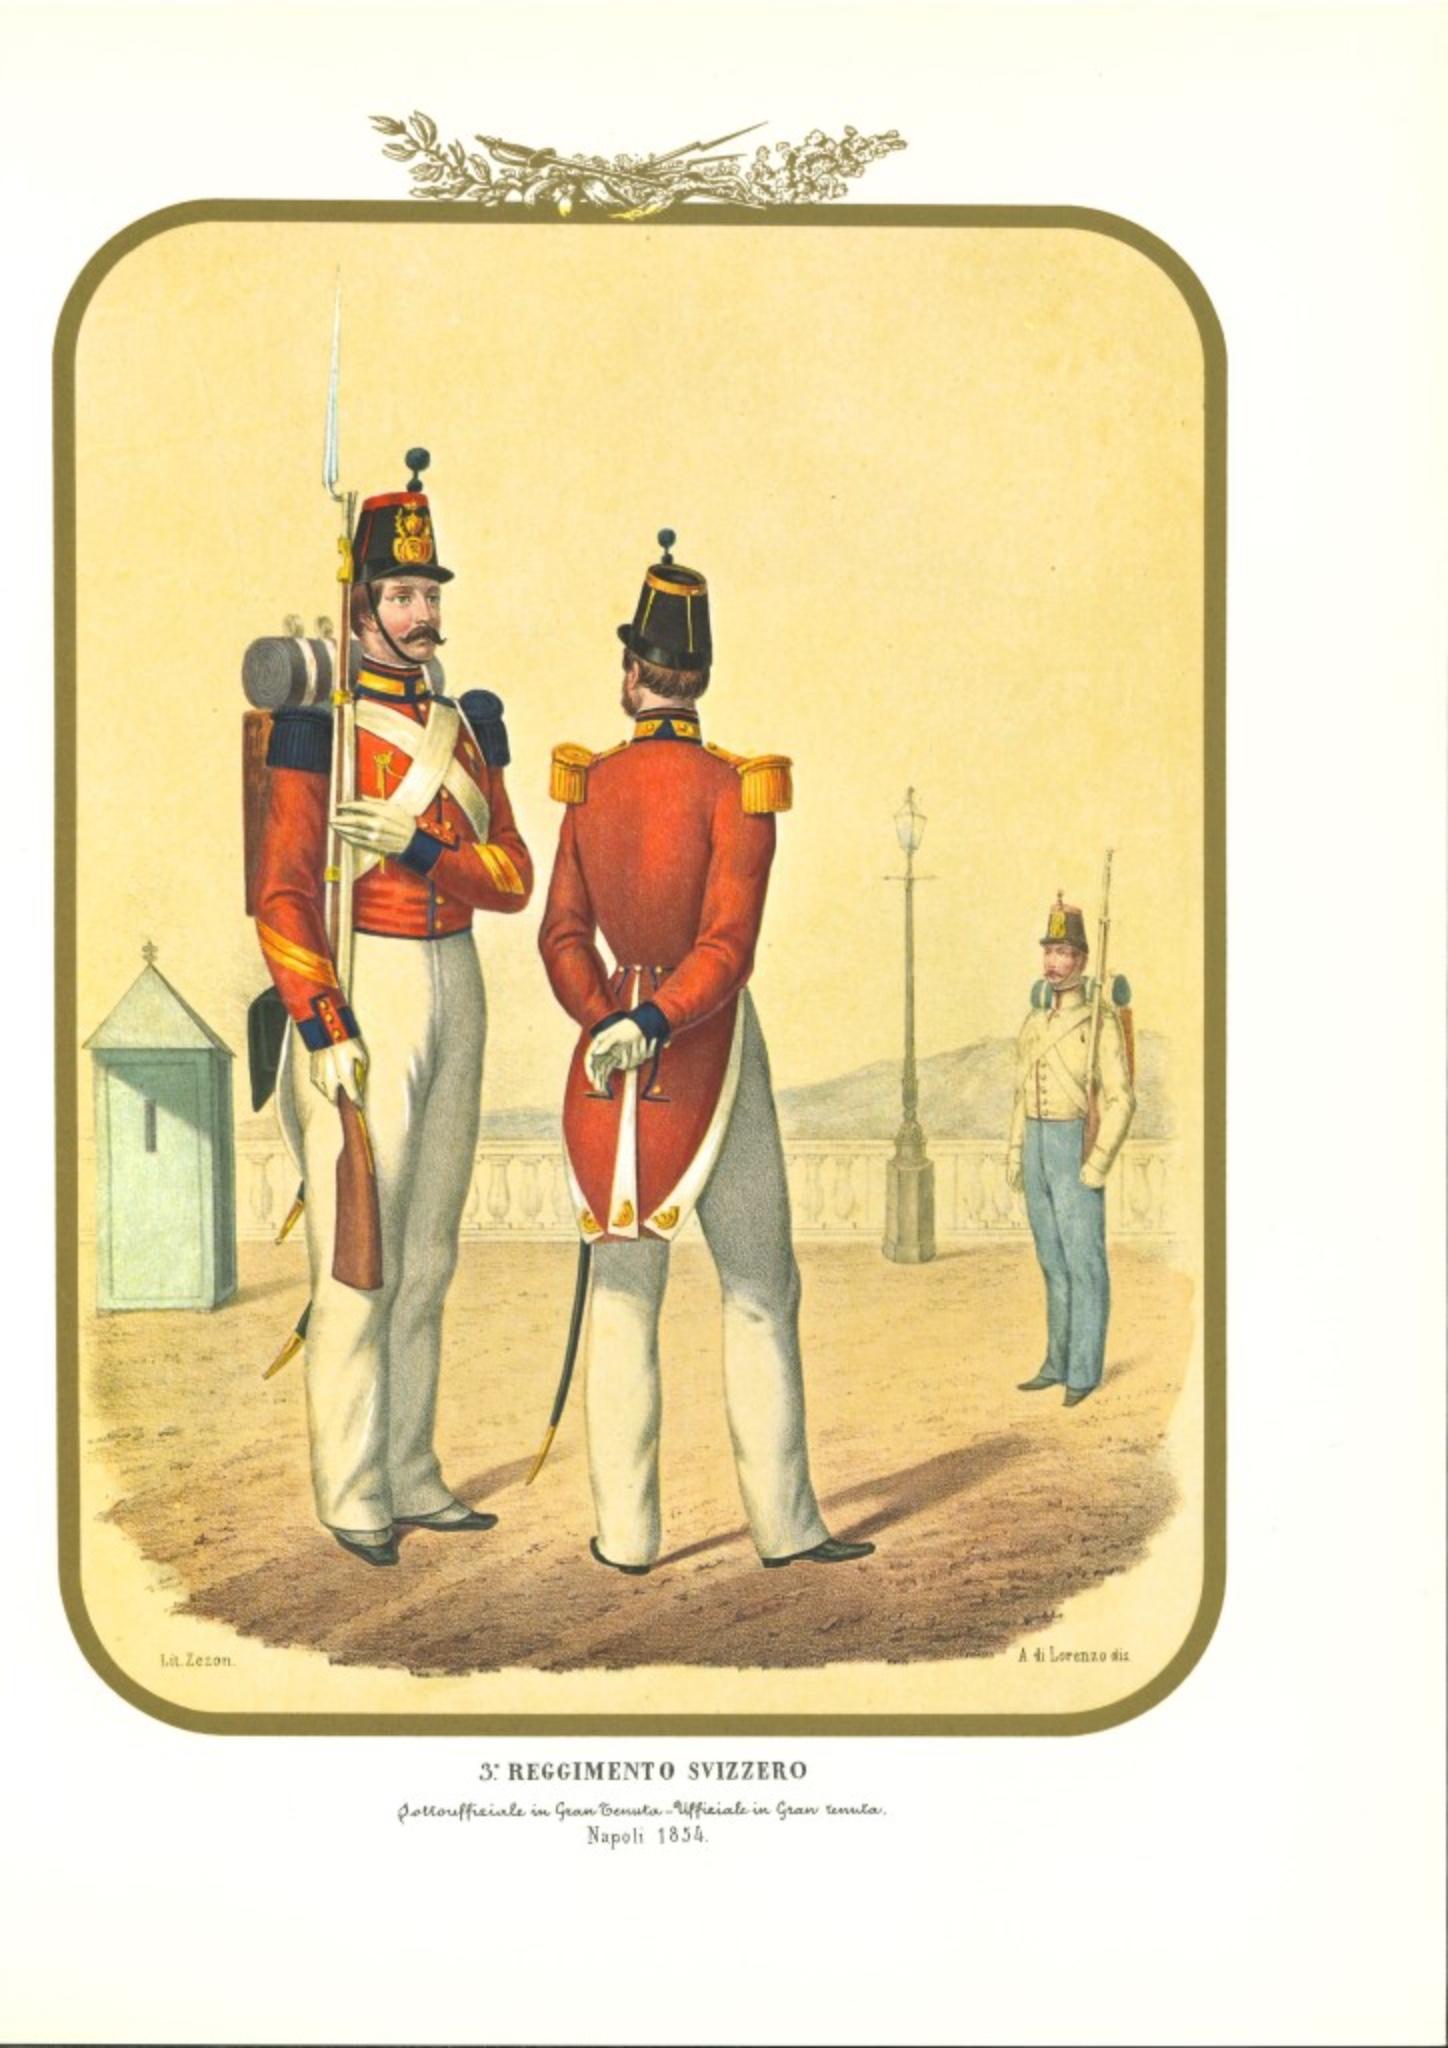 III Swiss Regiment is an original lithograph by Antonio Zezon. Naples 1854.

Interesting colored lithograph which describes some members of the Swiss Regiment: In the foreground an sub-Officer in full dress alongside with an Official in great